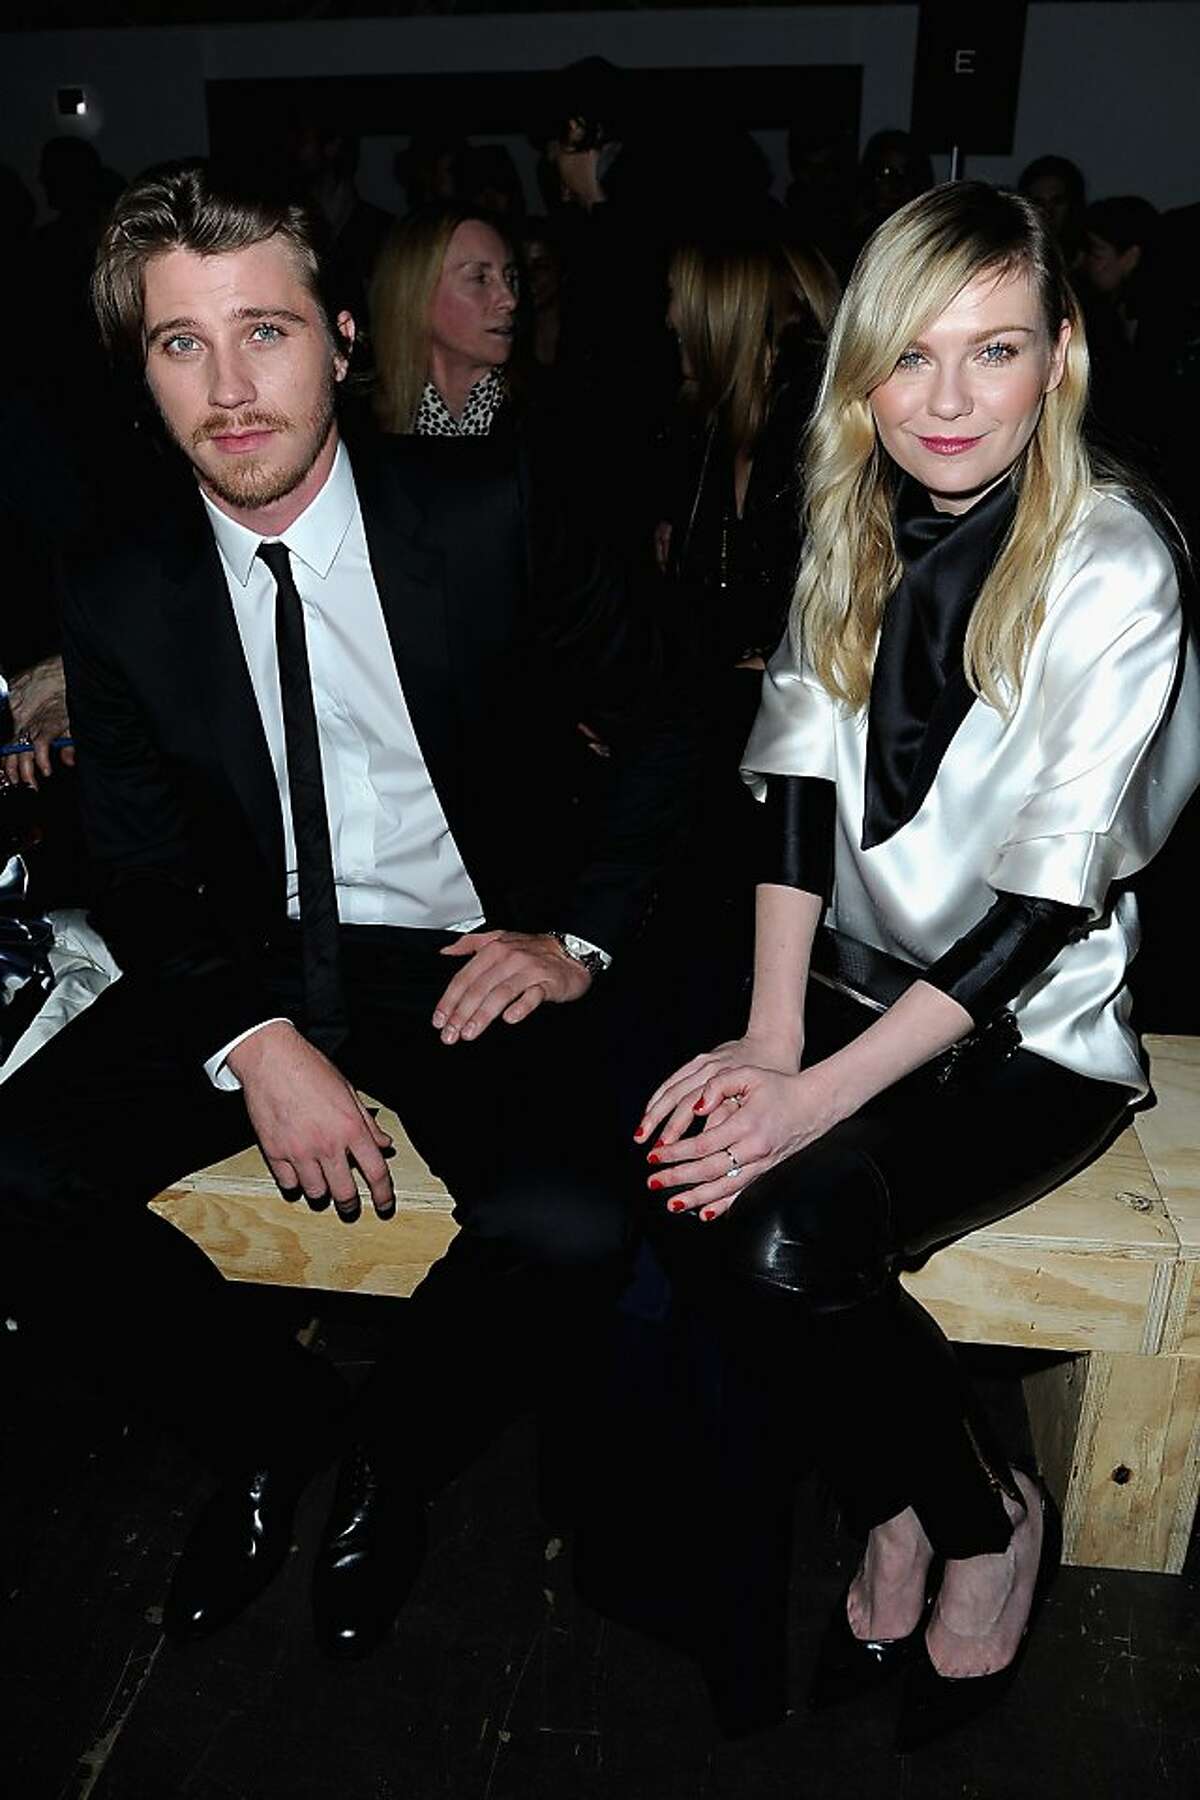 PARIS, FRANCE - MARCH 04: Kirsten Dunst and Garrett Hedlund attend the Saint Laurent Fall/Winter 2013 Ready-to-Wear show as part of Paris Fashion Week on March 4, 2013 in Paris, France. (Photo by Pascal Le Segretain/Getty Images)